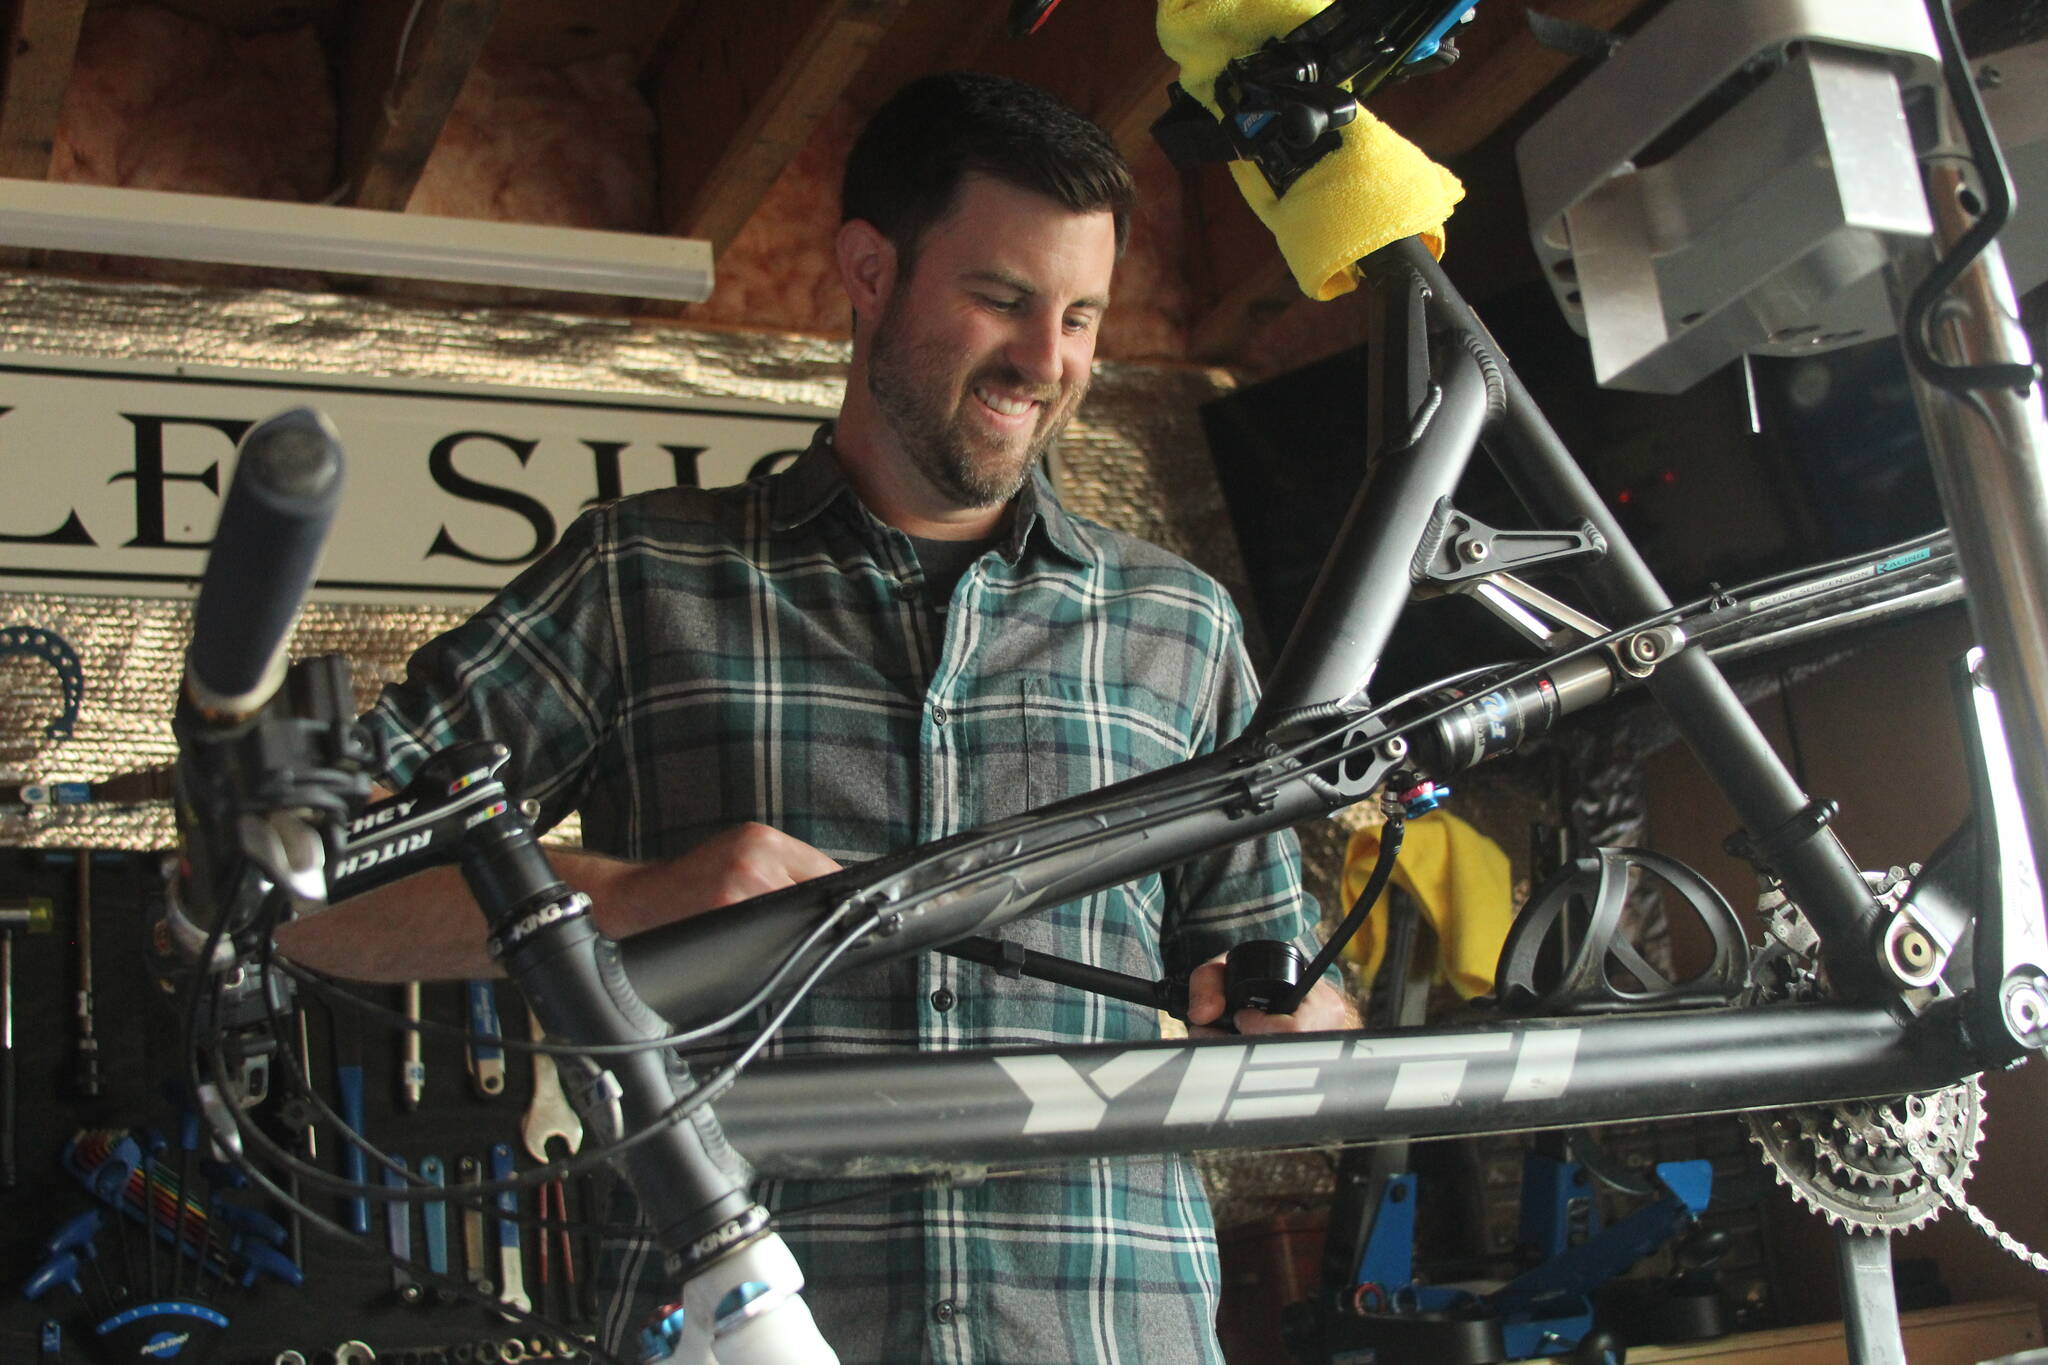 Photo by Karina Andrew/Whidbey News-Times
Trevor Stevens, owner of Celerity Cycles, fixes a bicycle in his home shop in Coupeville.